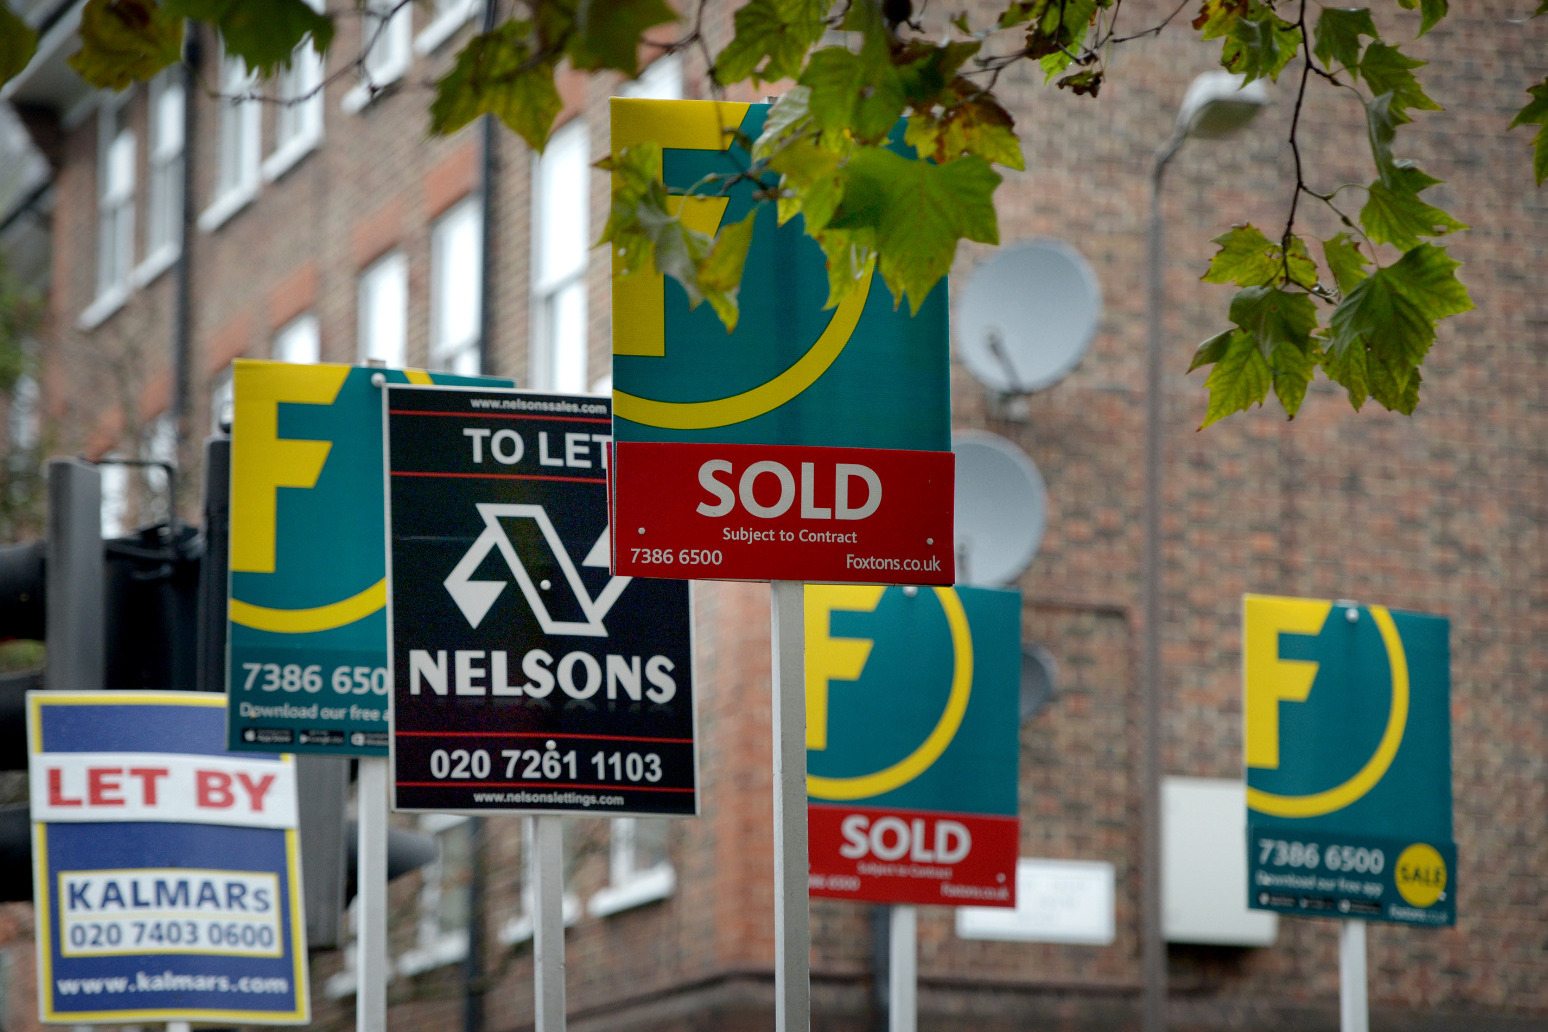 London rent prices surge by 20% but house sales losing steam 